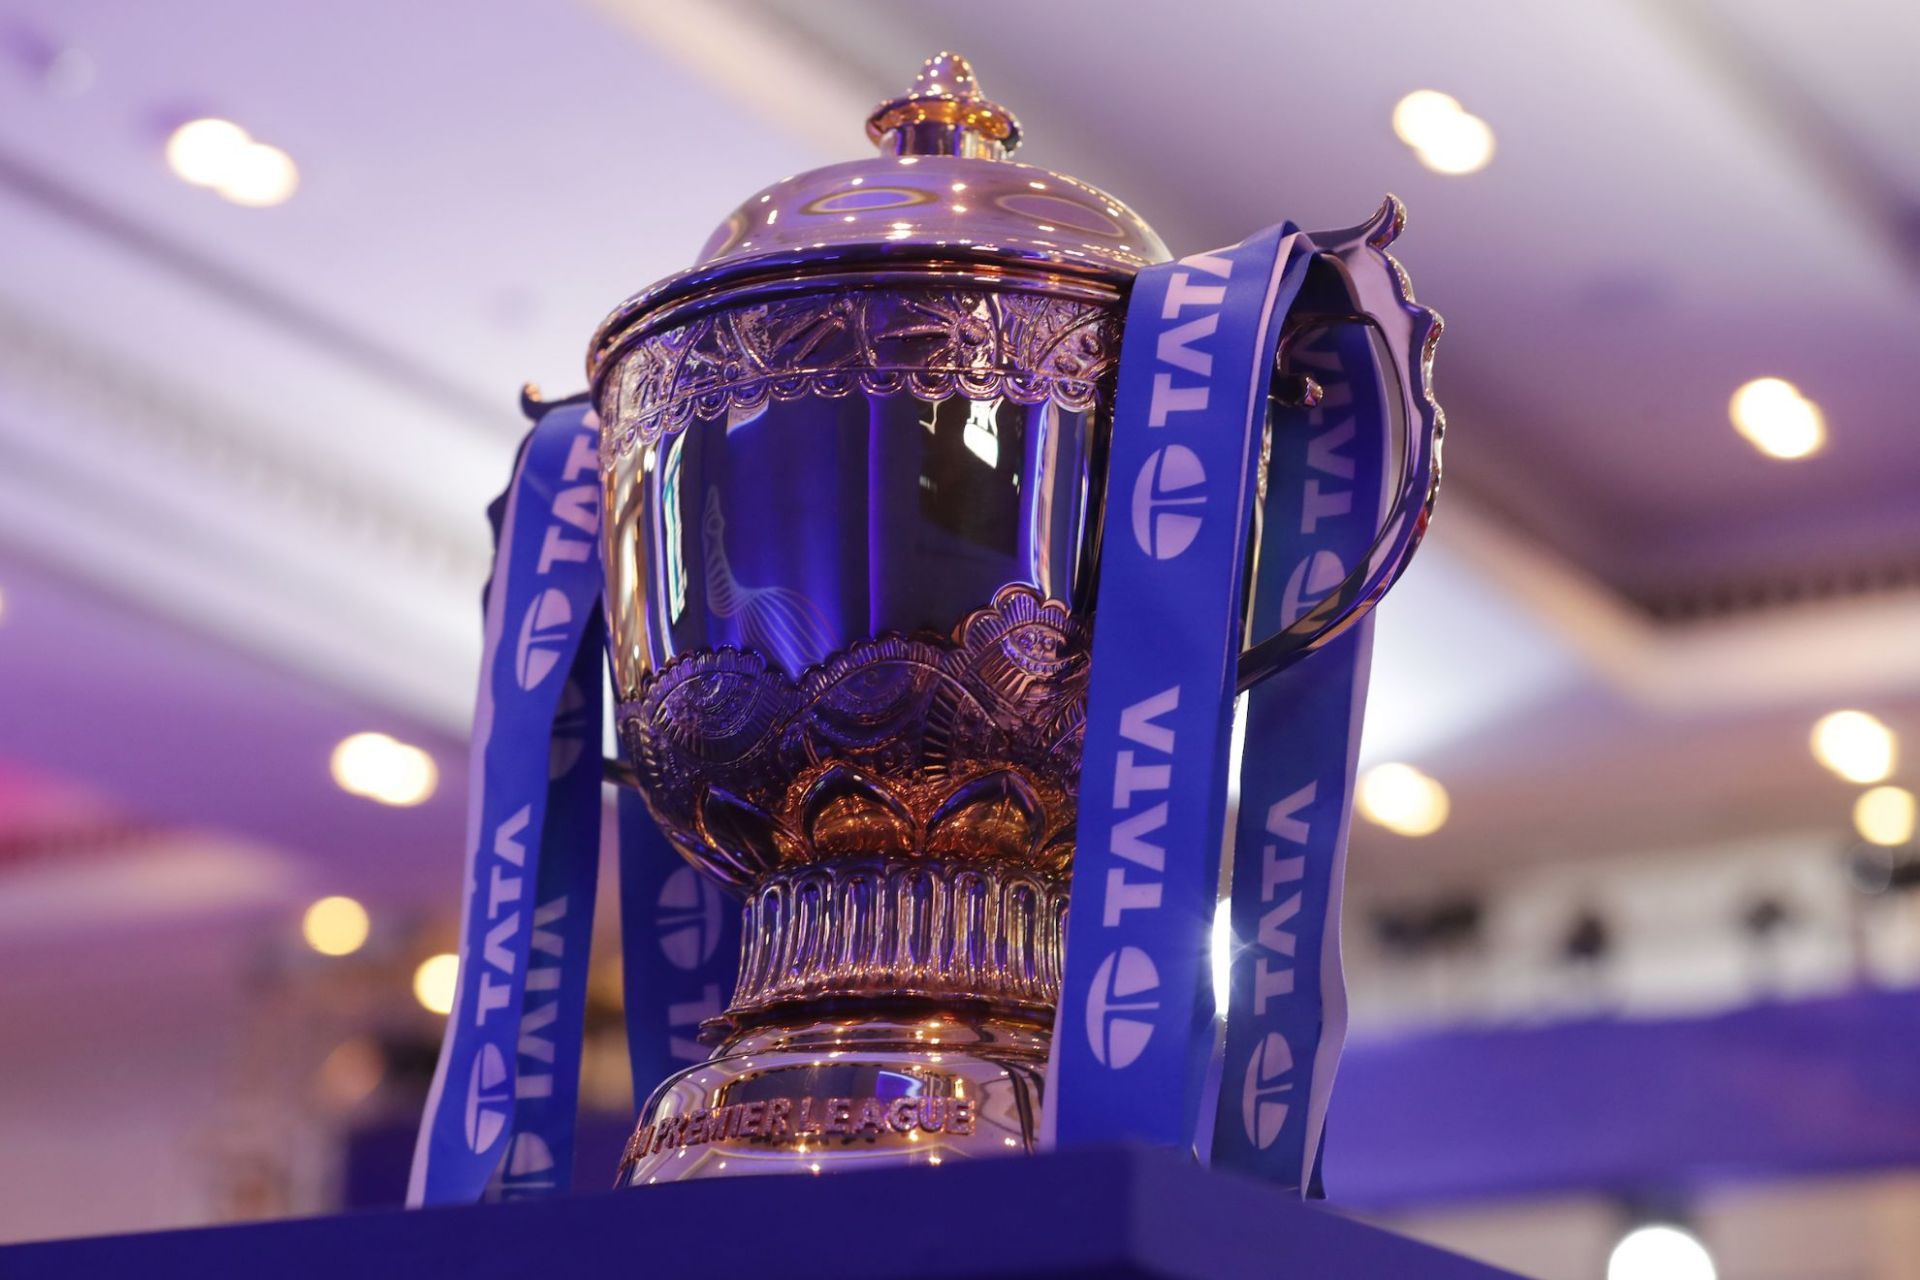 The IPL has established its might in the cricketing world owing to its attractiveness to players, fans and the organisers